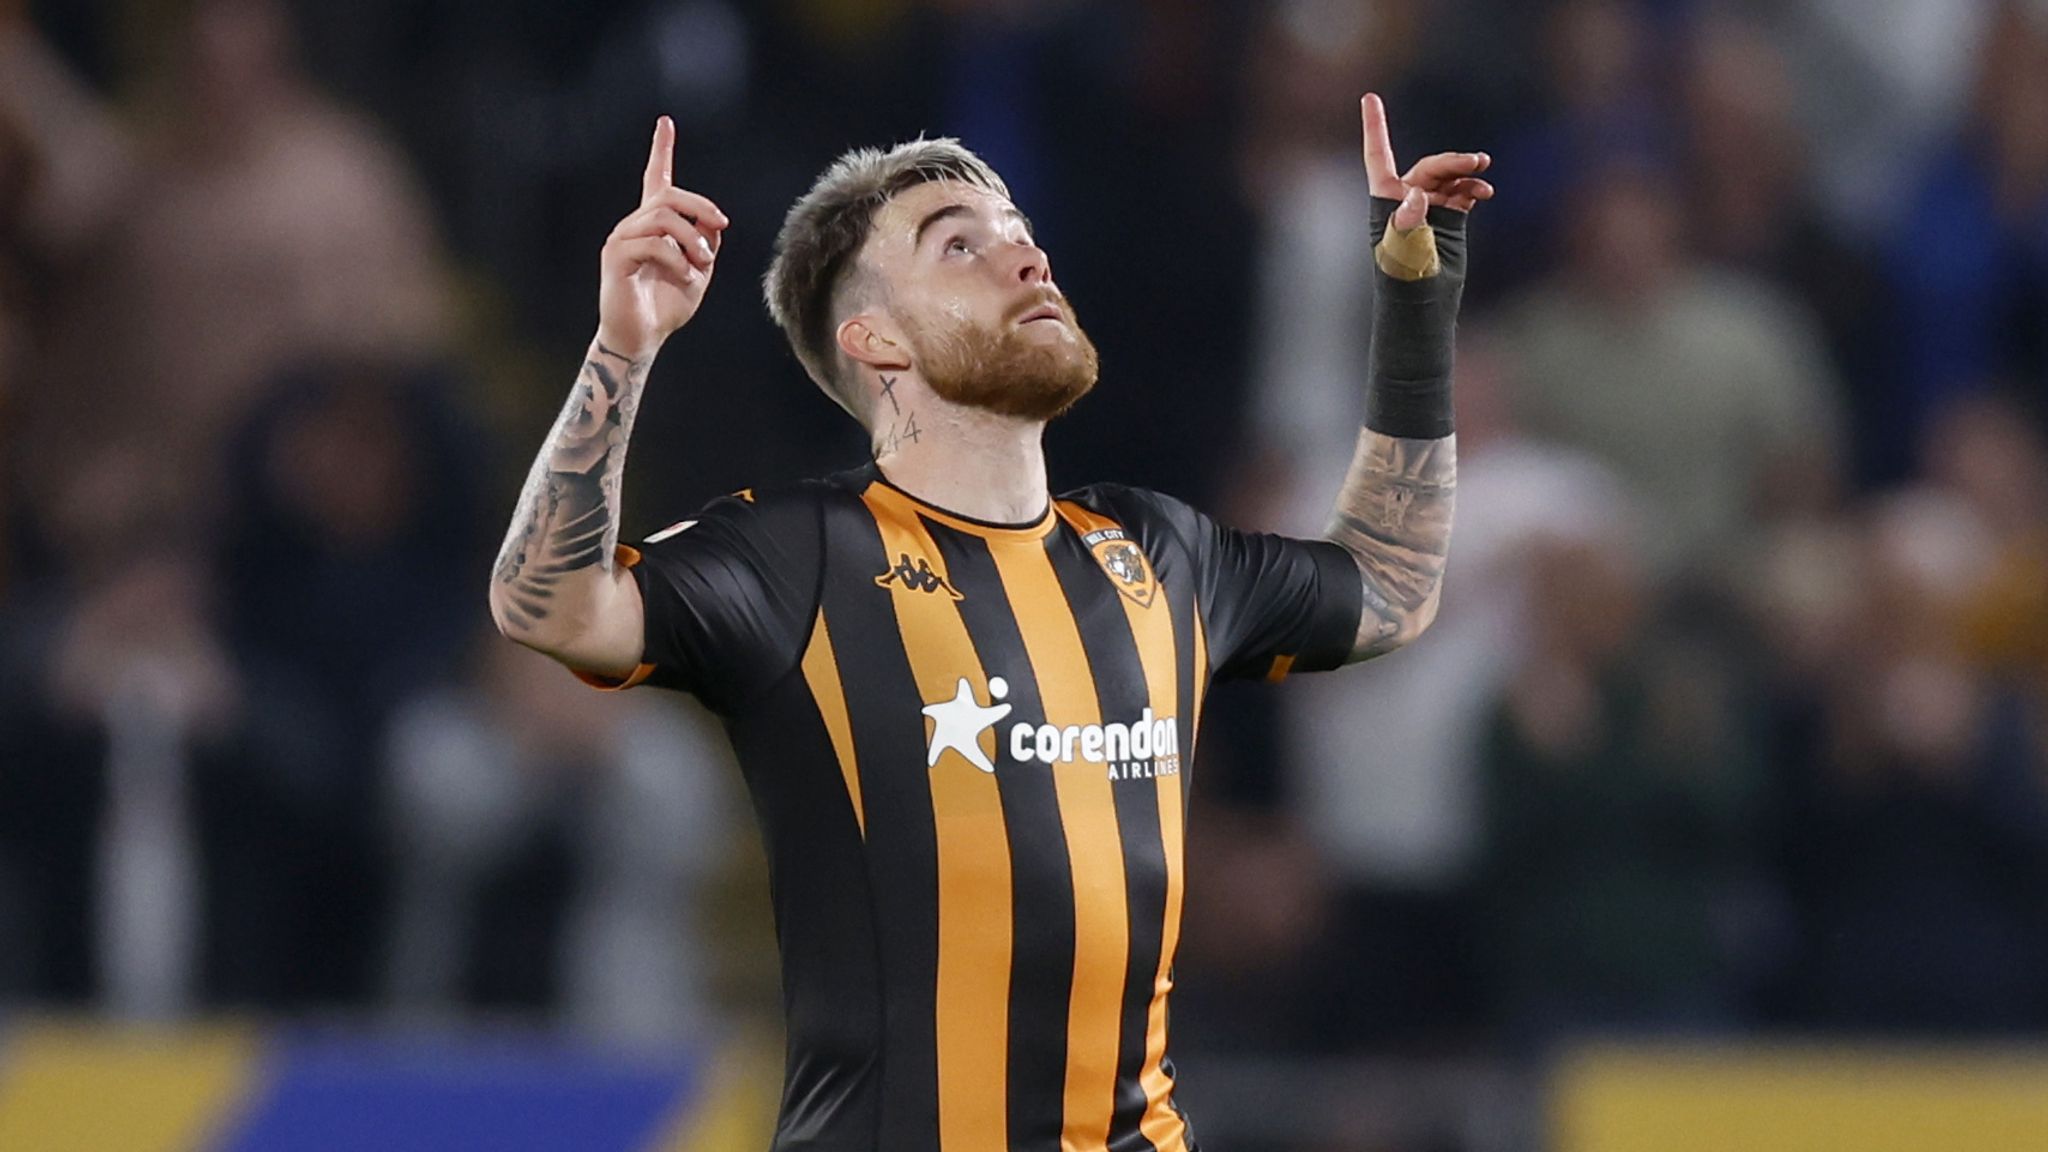 Hull City 1-1 Coventry: Aaron Connolly earns late point for Tigers |  Football News | Sky Sports